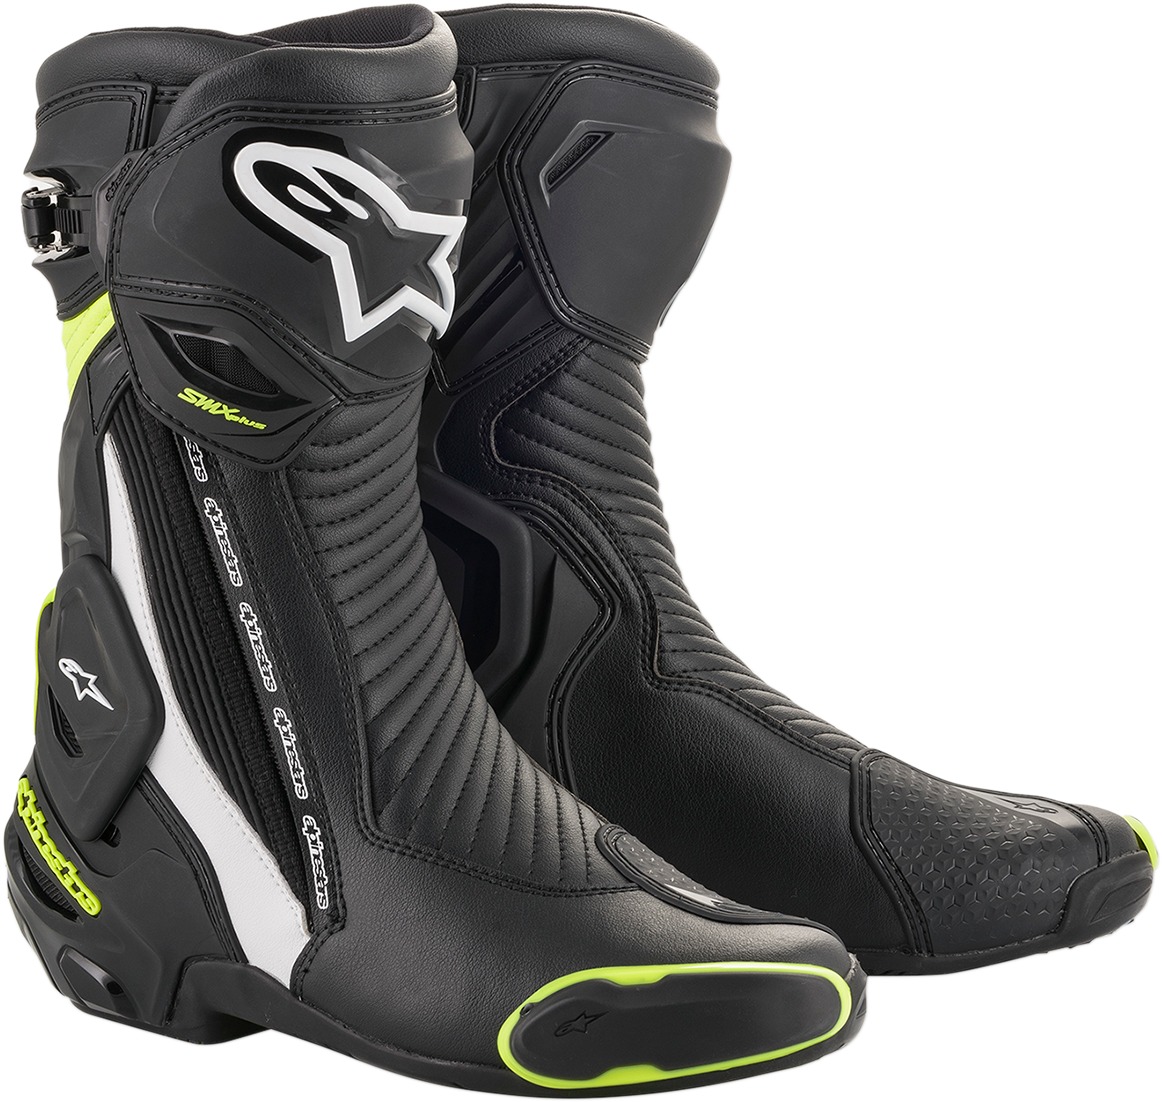 SMX Plus Street Riding Boots Black/White/Yellow US 8 - Click Image to Close